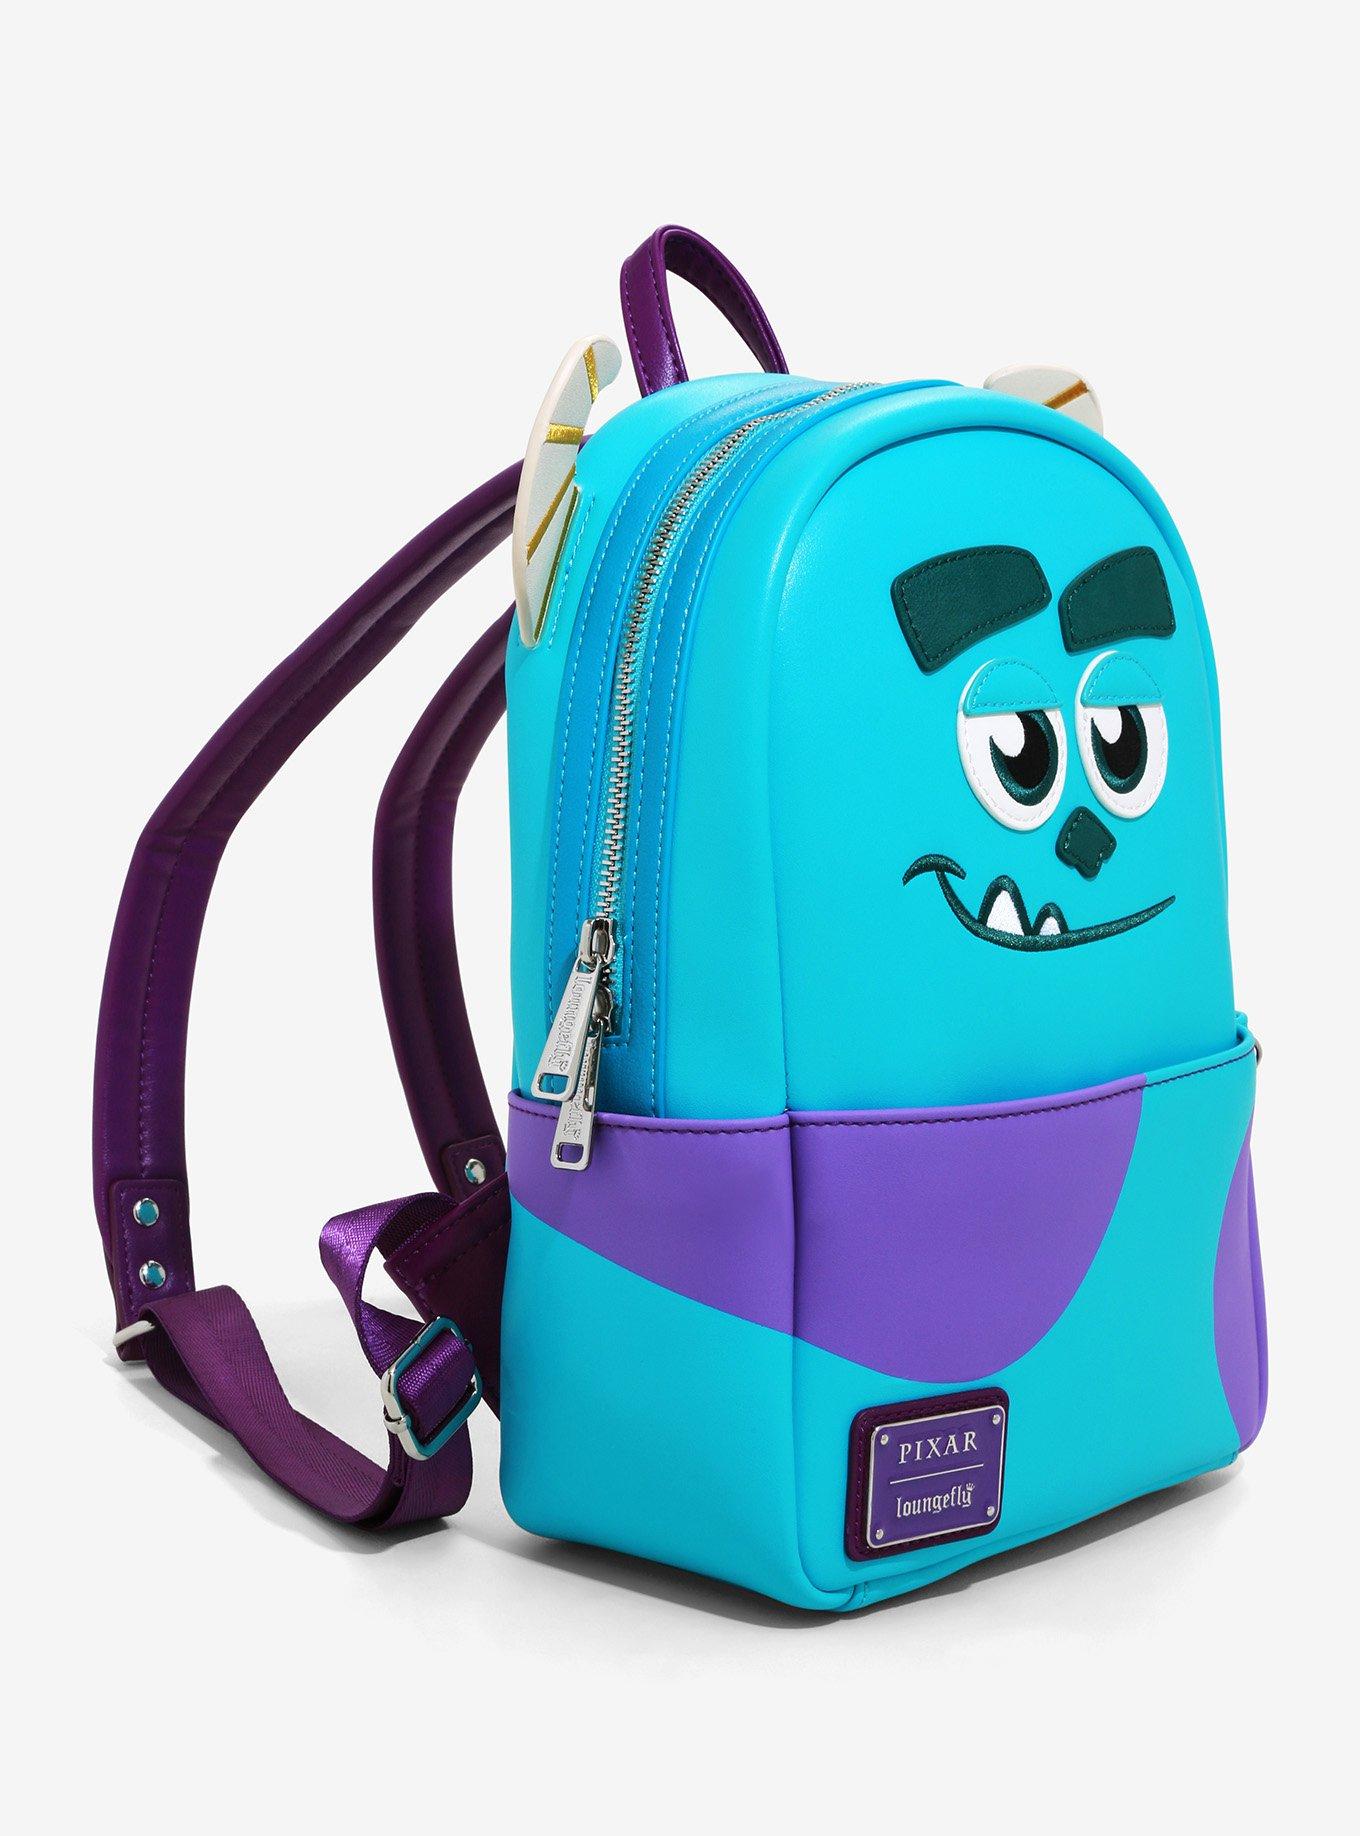 Loungefly Disney Pixar Monsters Inc Boo Mike Sulley Cosplay Mini Backpack